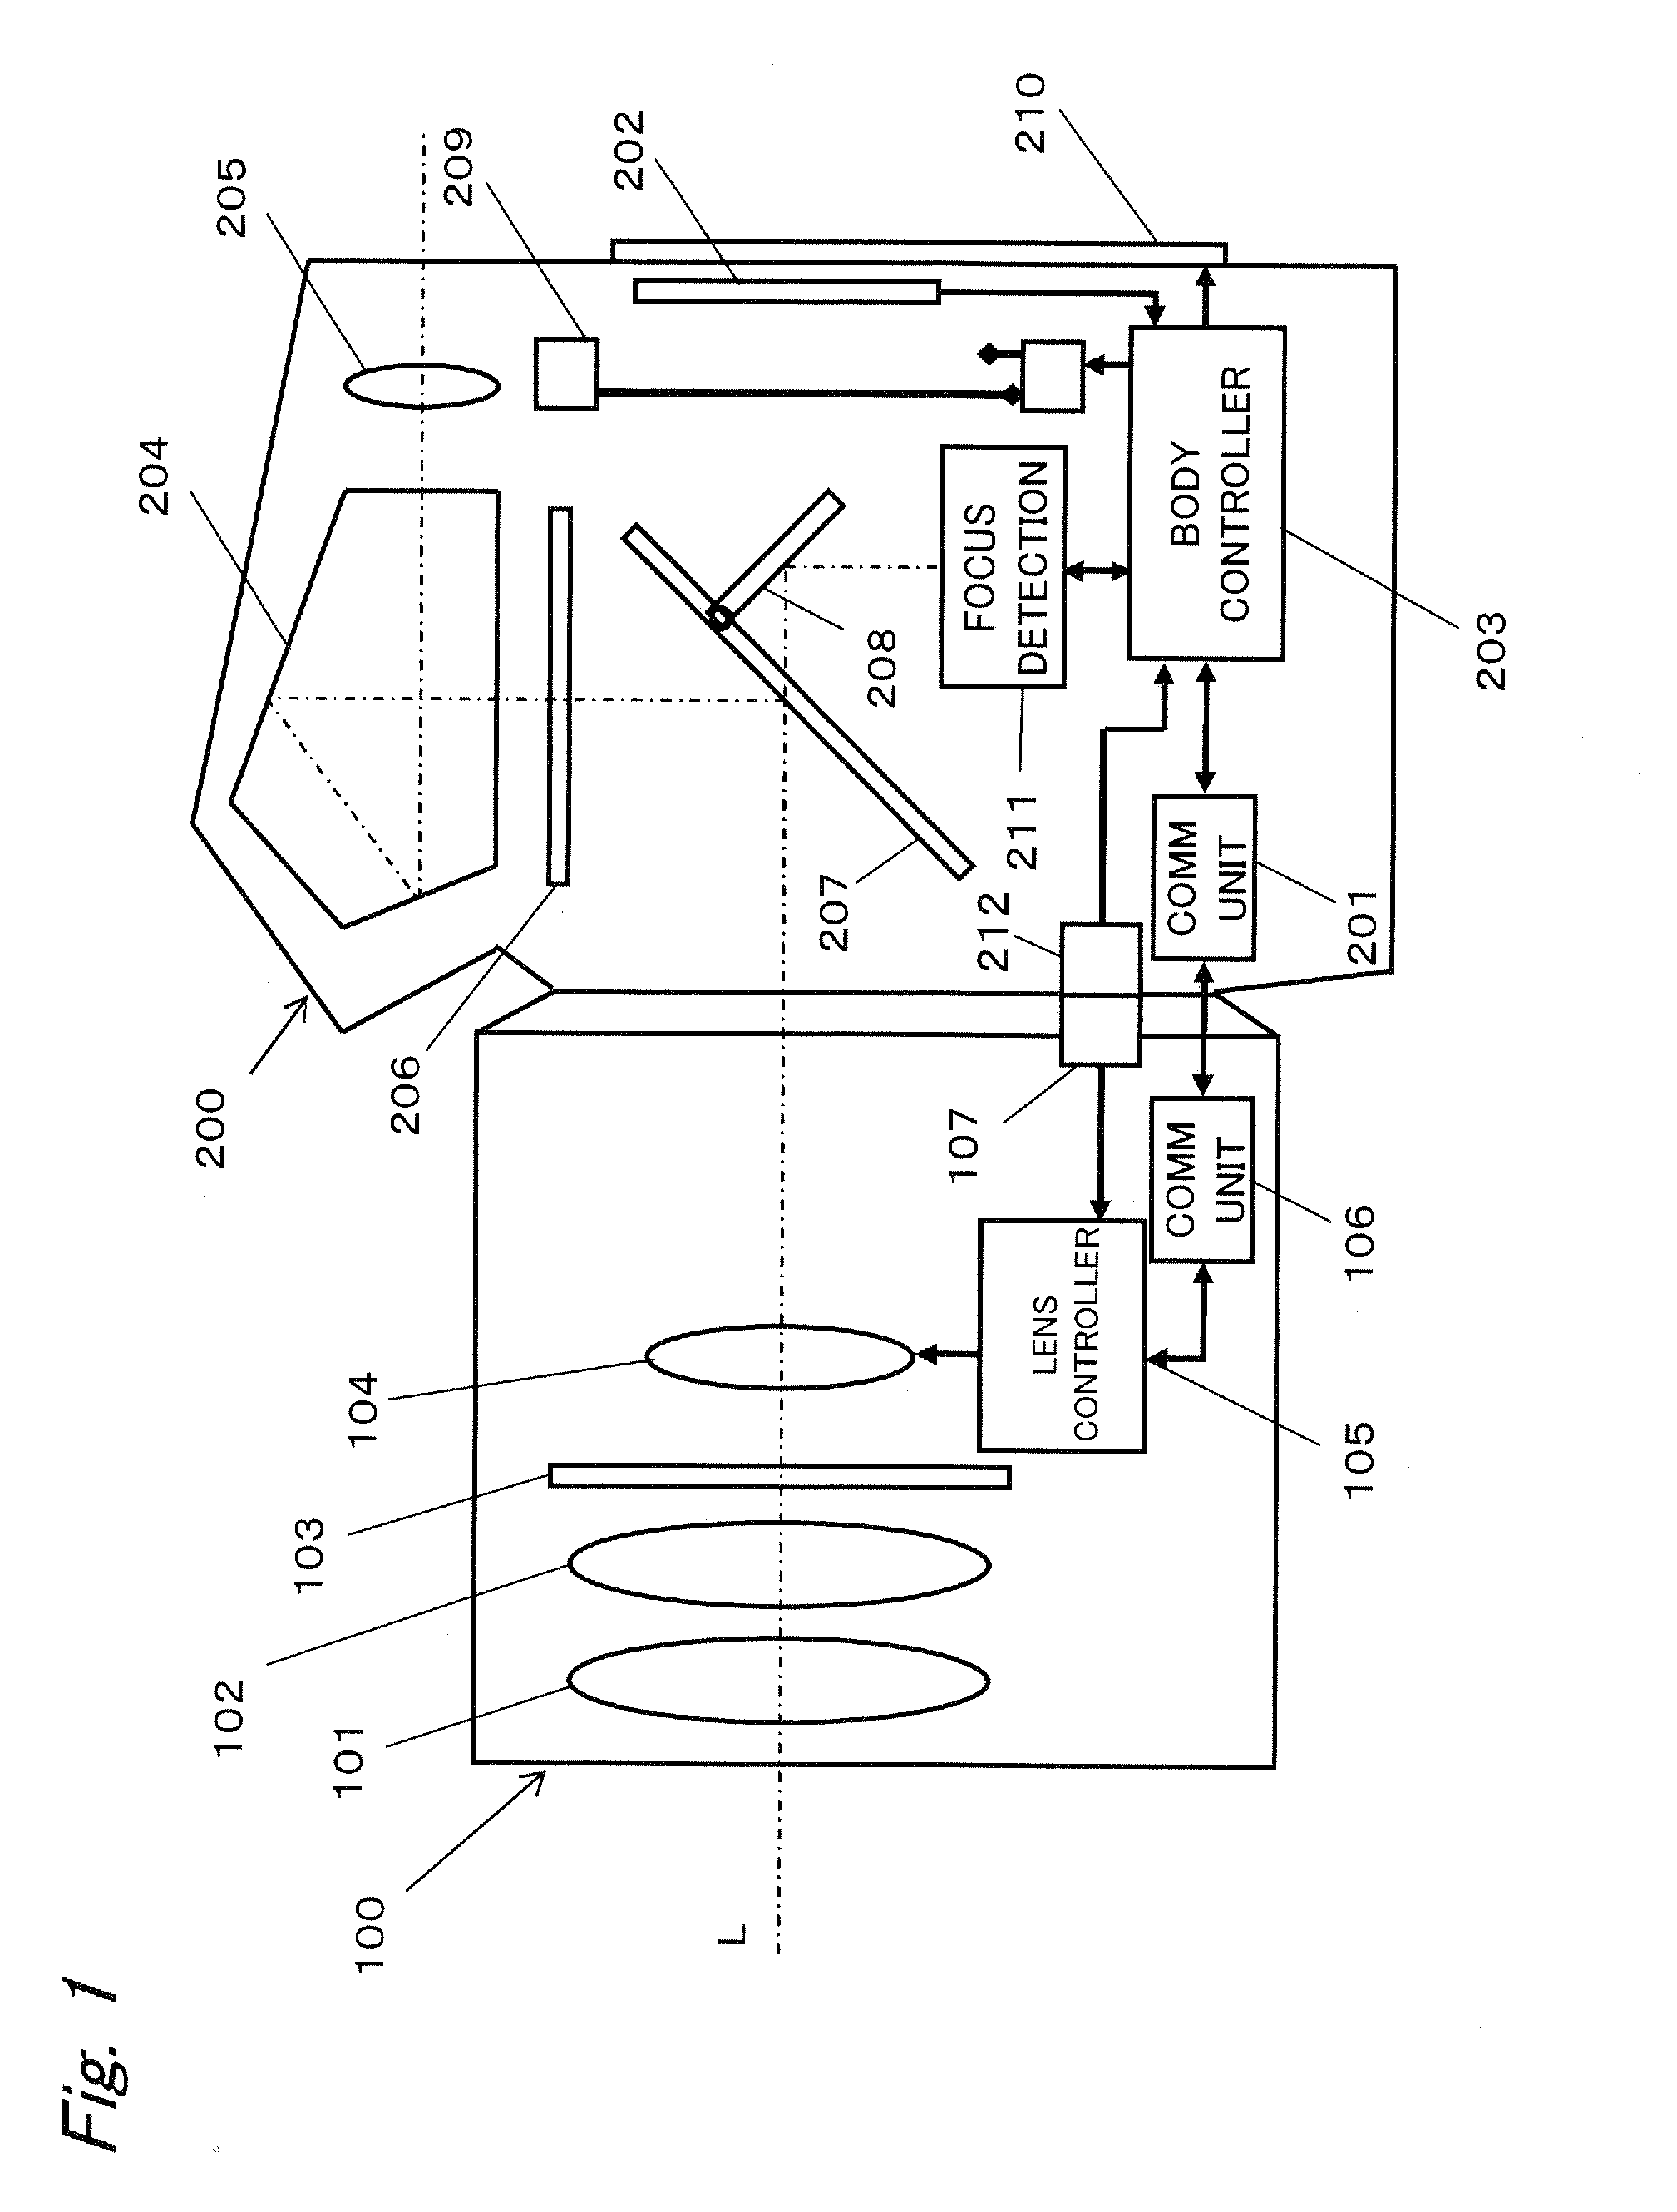 Imaging System and Camera Body